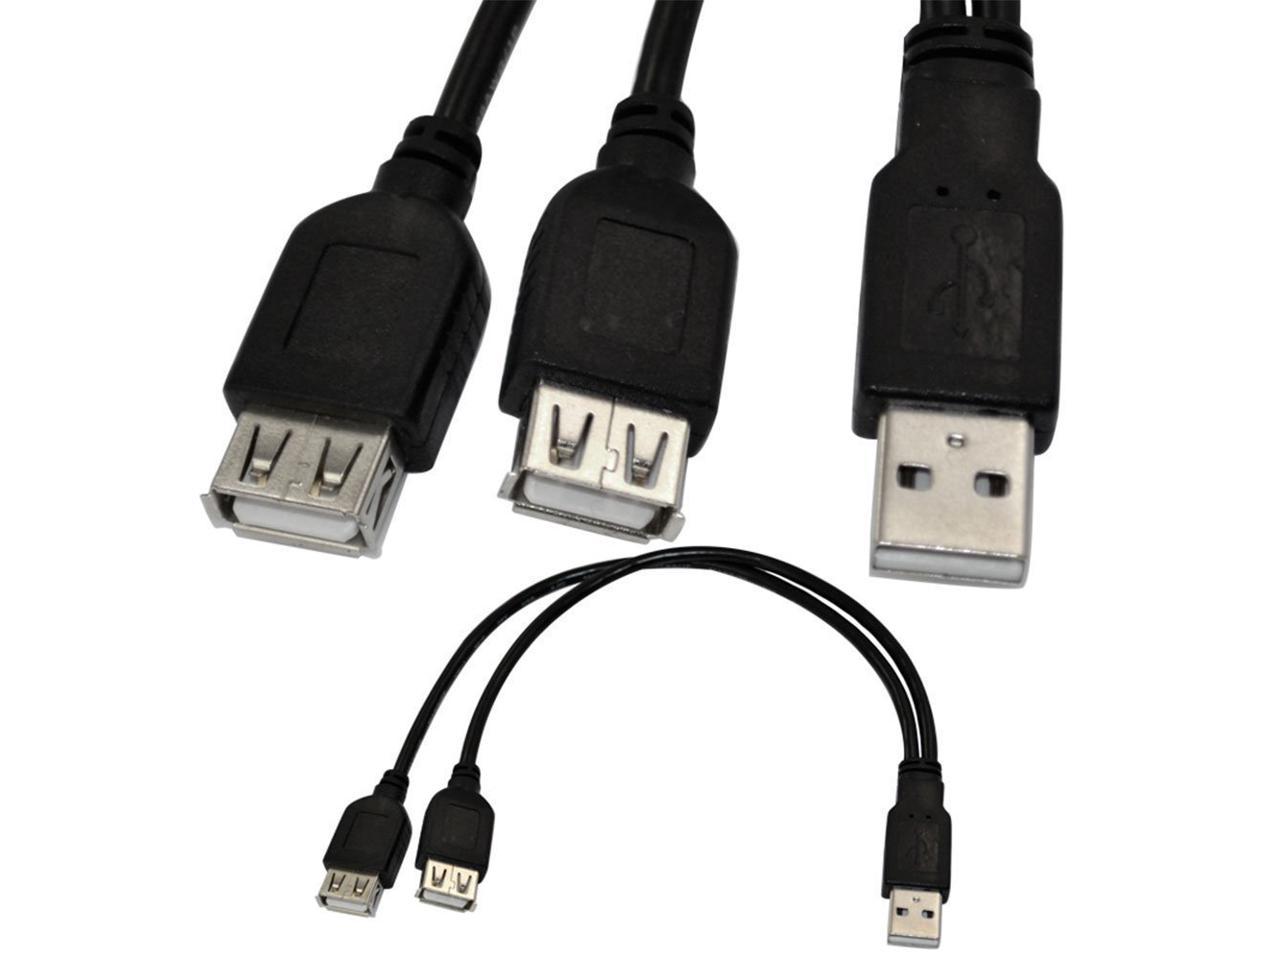 USB 2.0 A Male To 2 Dual Female Jack Y Splitter Hub Power Cord Adapter Cable New 